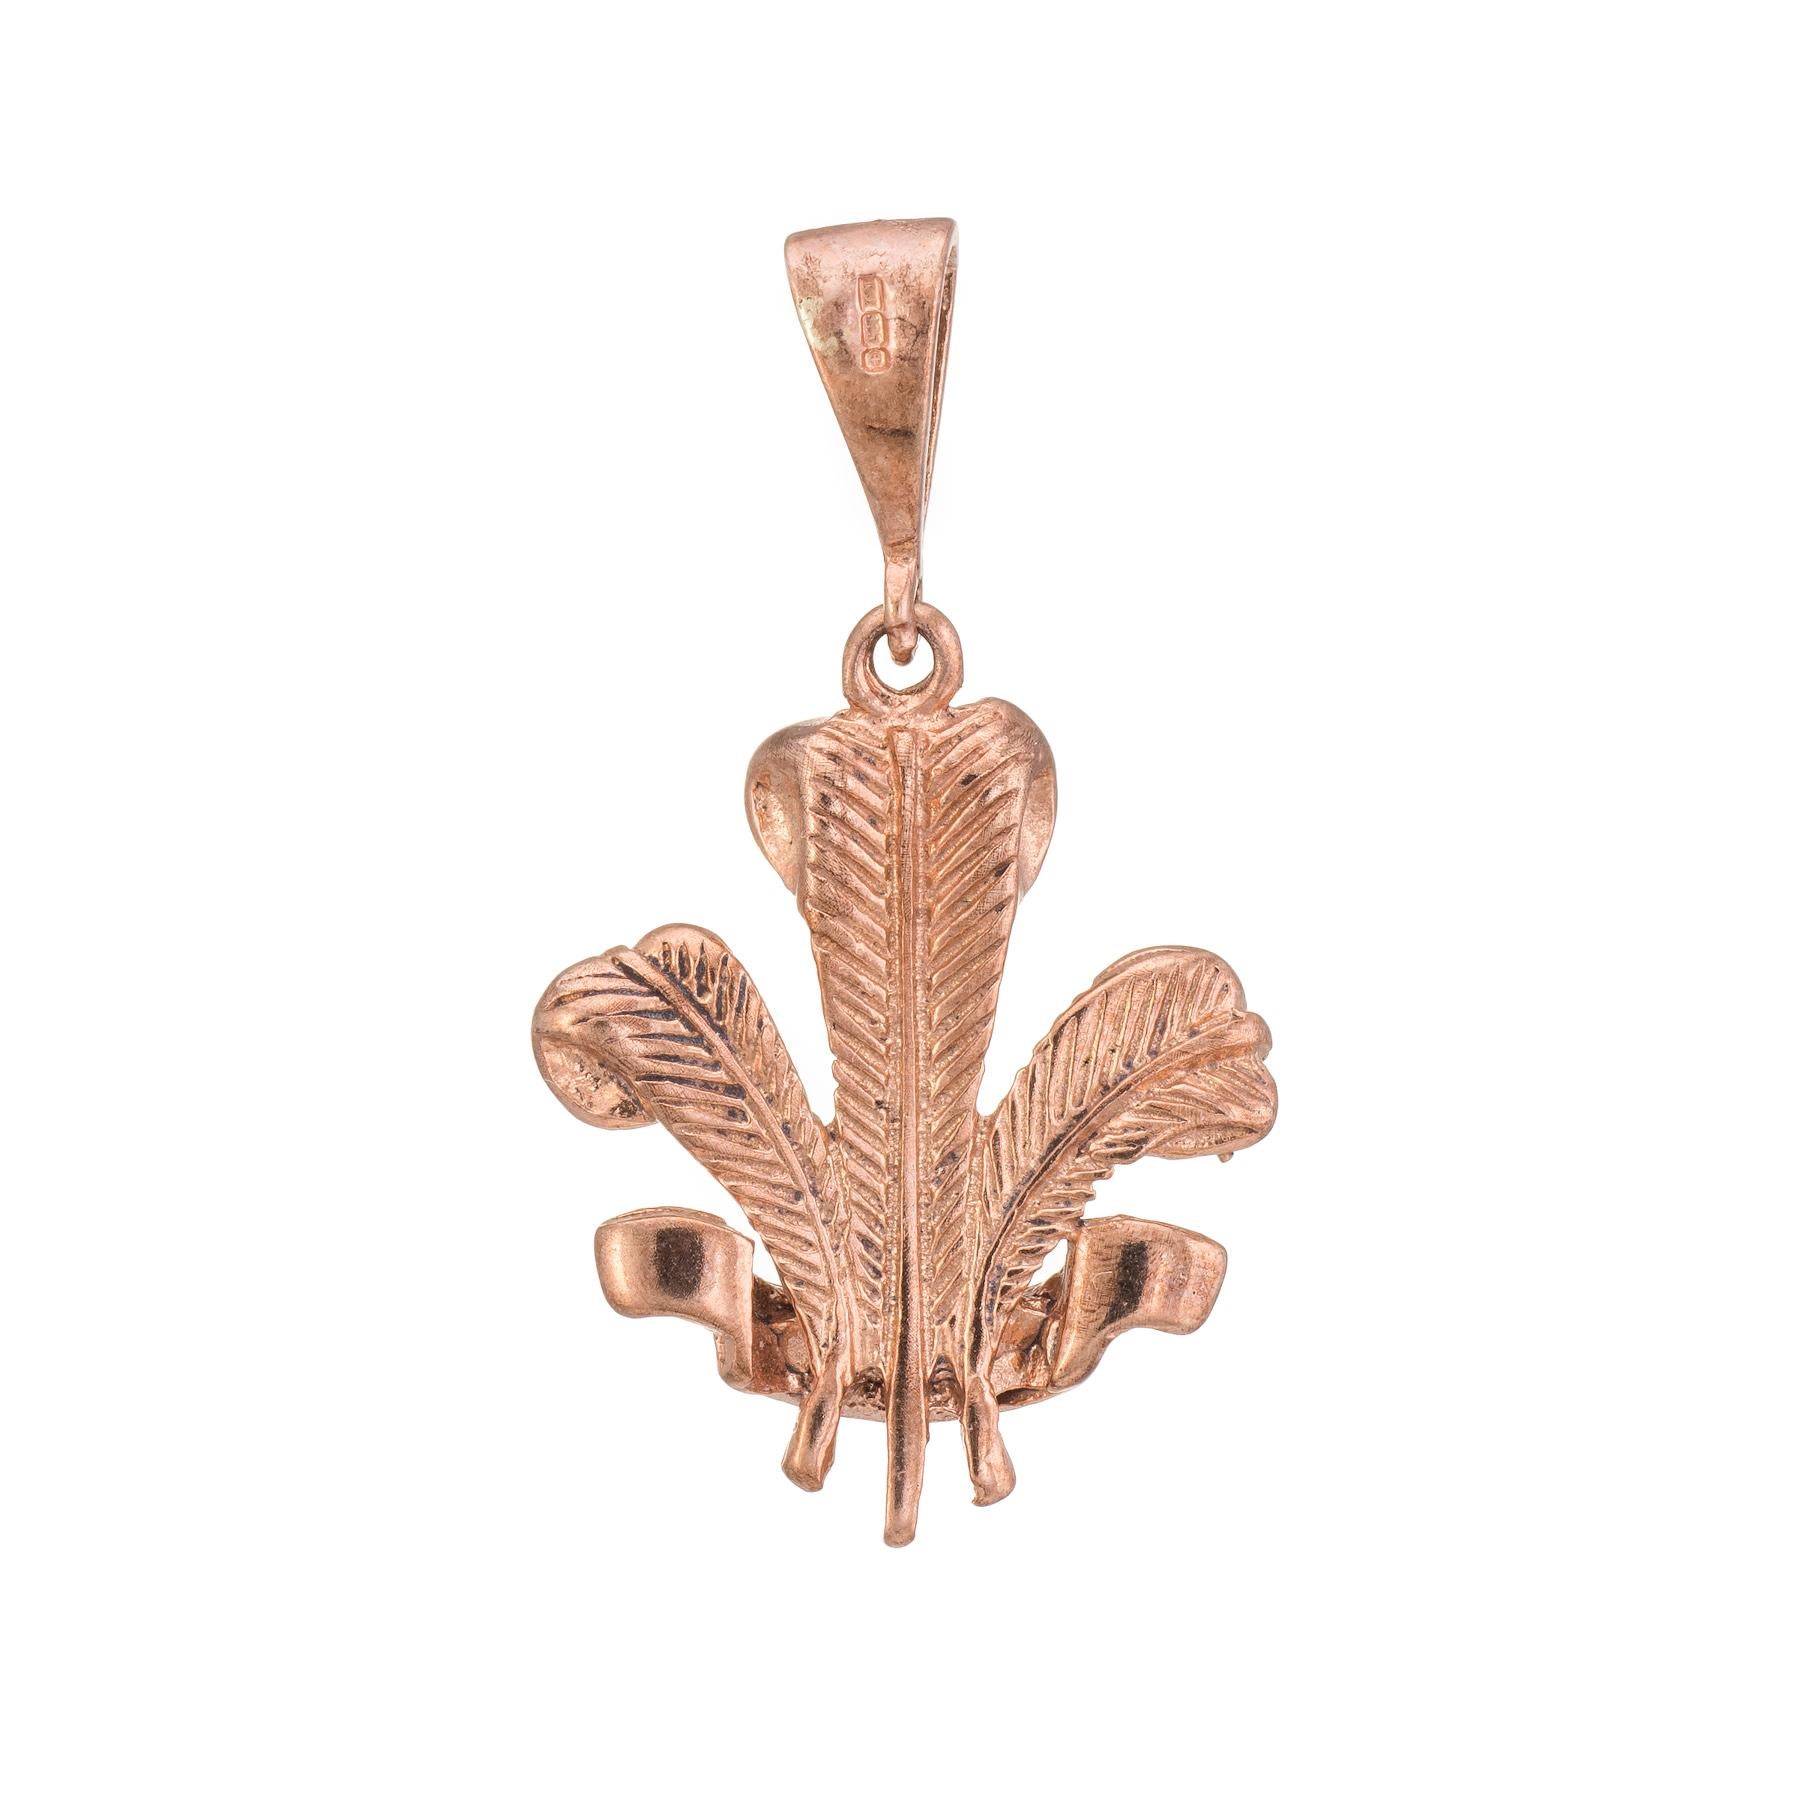 Finely detailed Prince of Wales feathers charm, crafted in 9 karat rose gold.

The Prince of Wales feathers is the heraldic badge of the Prince of Wales. It consist of three white ostrich feathers. A ribbon below the coronet bears the motto Ich Dien